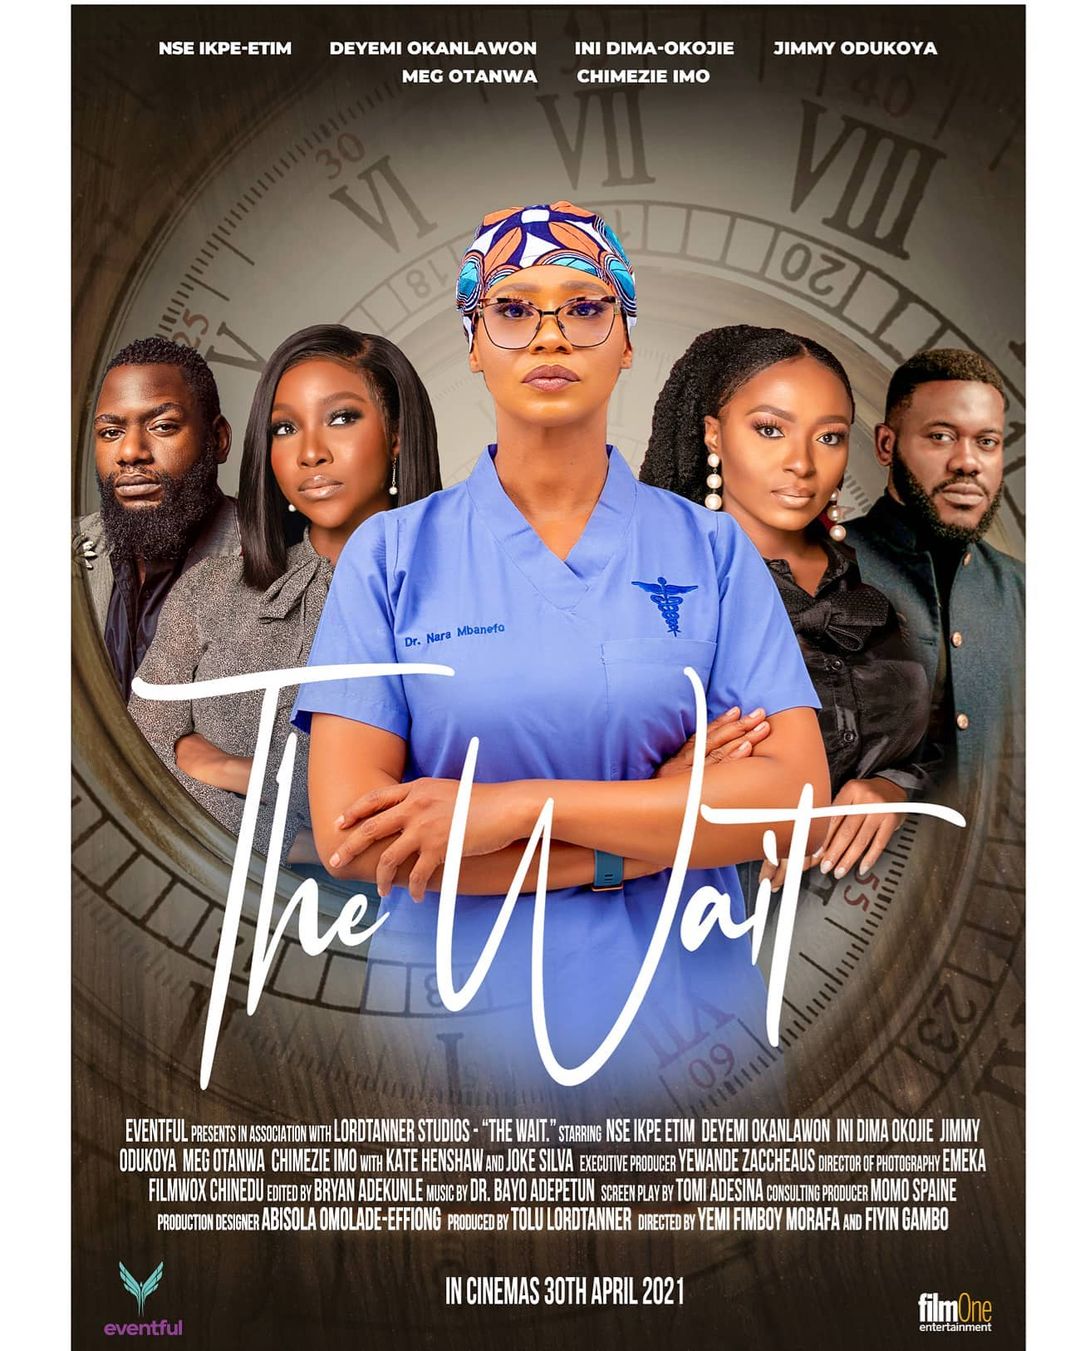 164965230 1141042549753061 2686825476843064057 n - Exclusive Conversation with Mrs. Yewande Zaccheaus, Executive producer of “The Wait”  